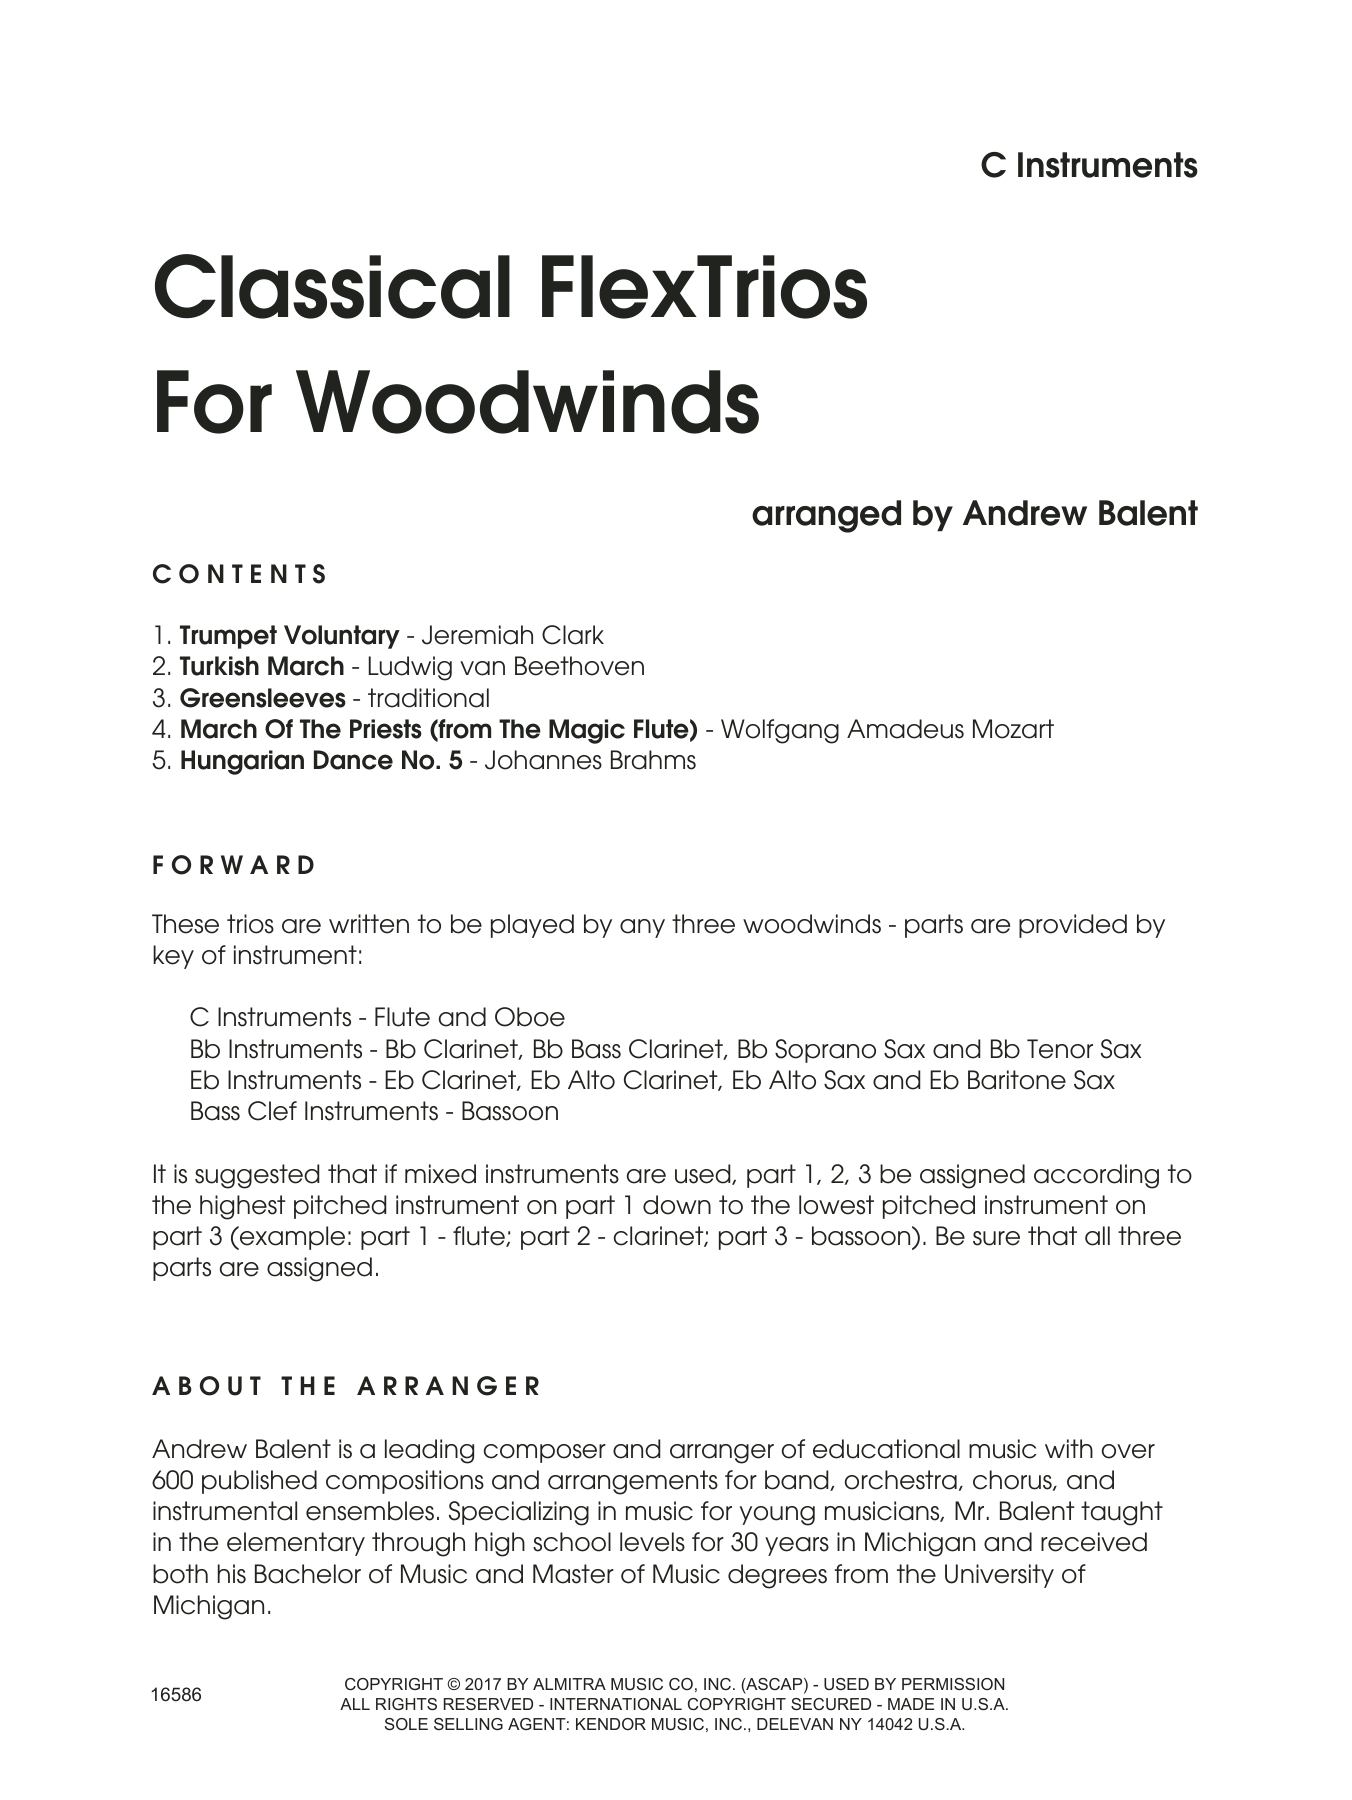 Download Andrew Balent Classical FlexTrios For Woodwinds - C T Sheet Music